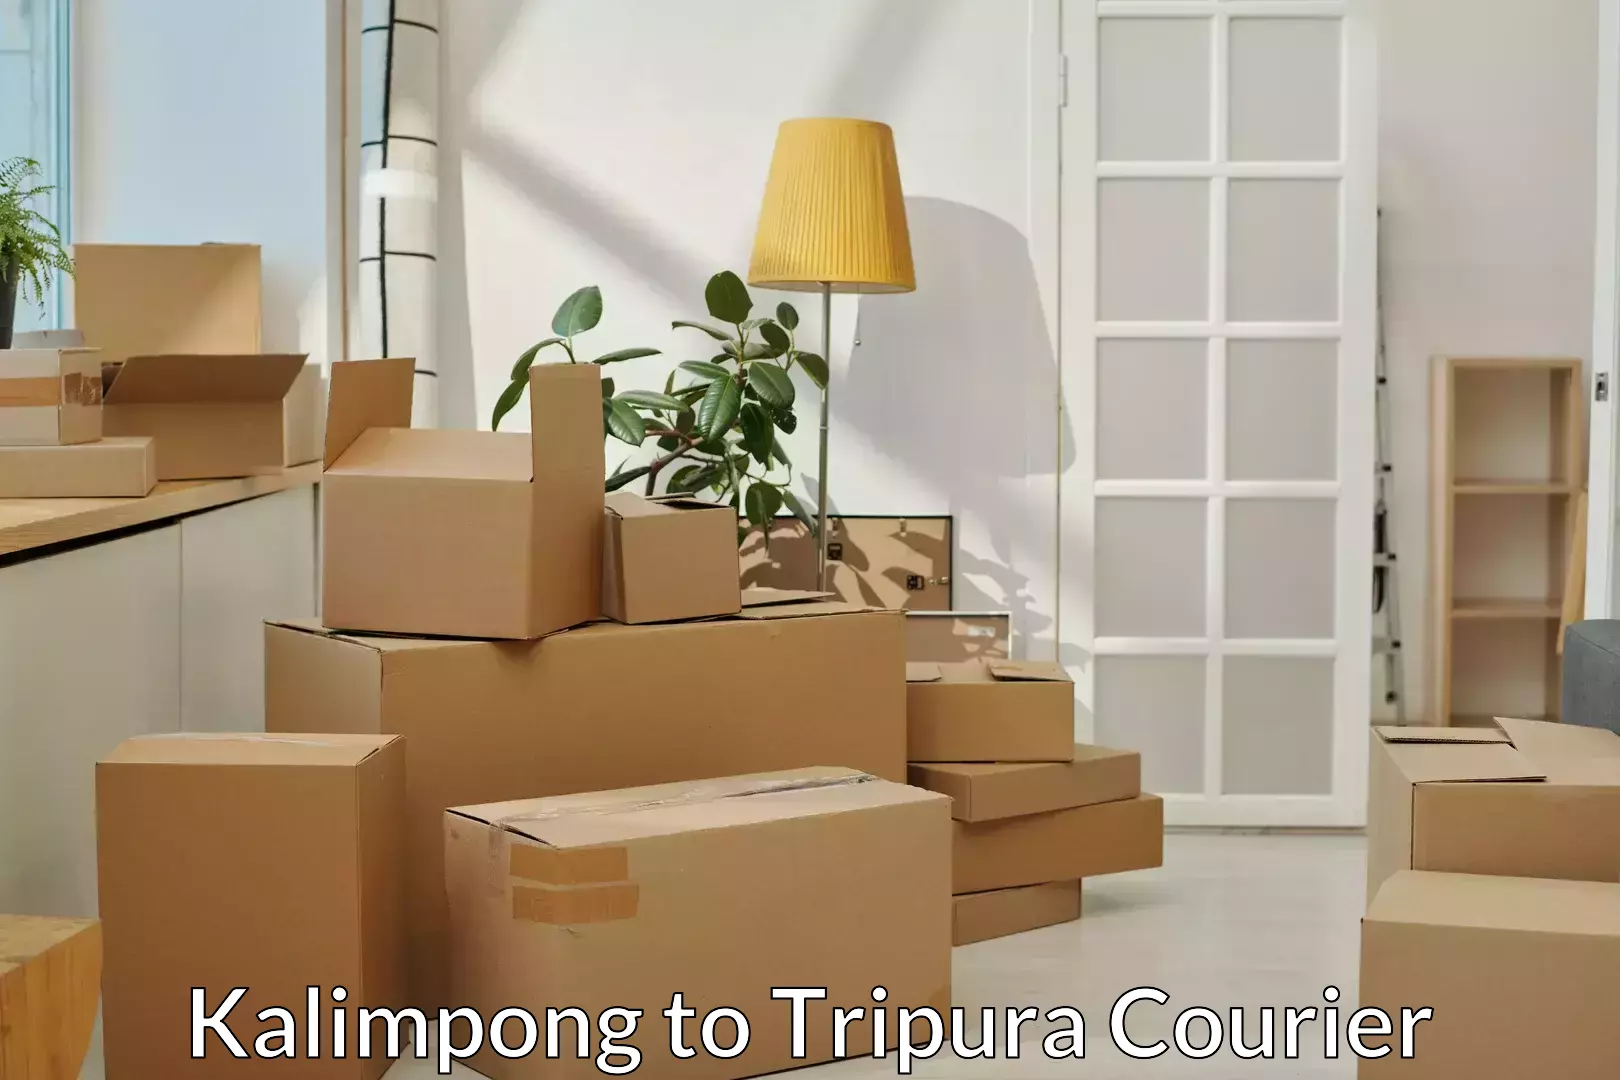 Budget-friendly movers Kalimpong to Agartala